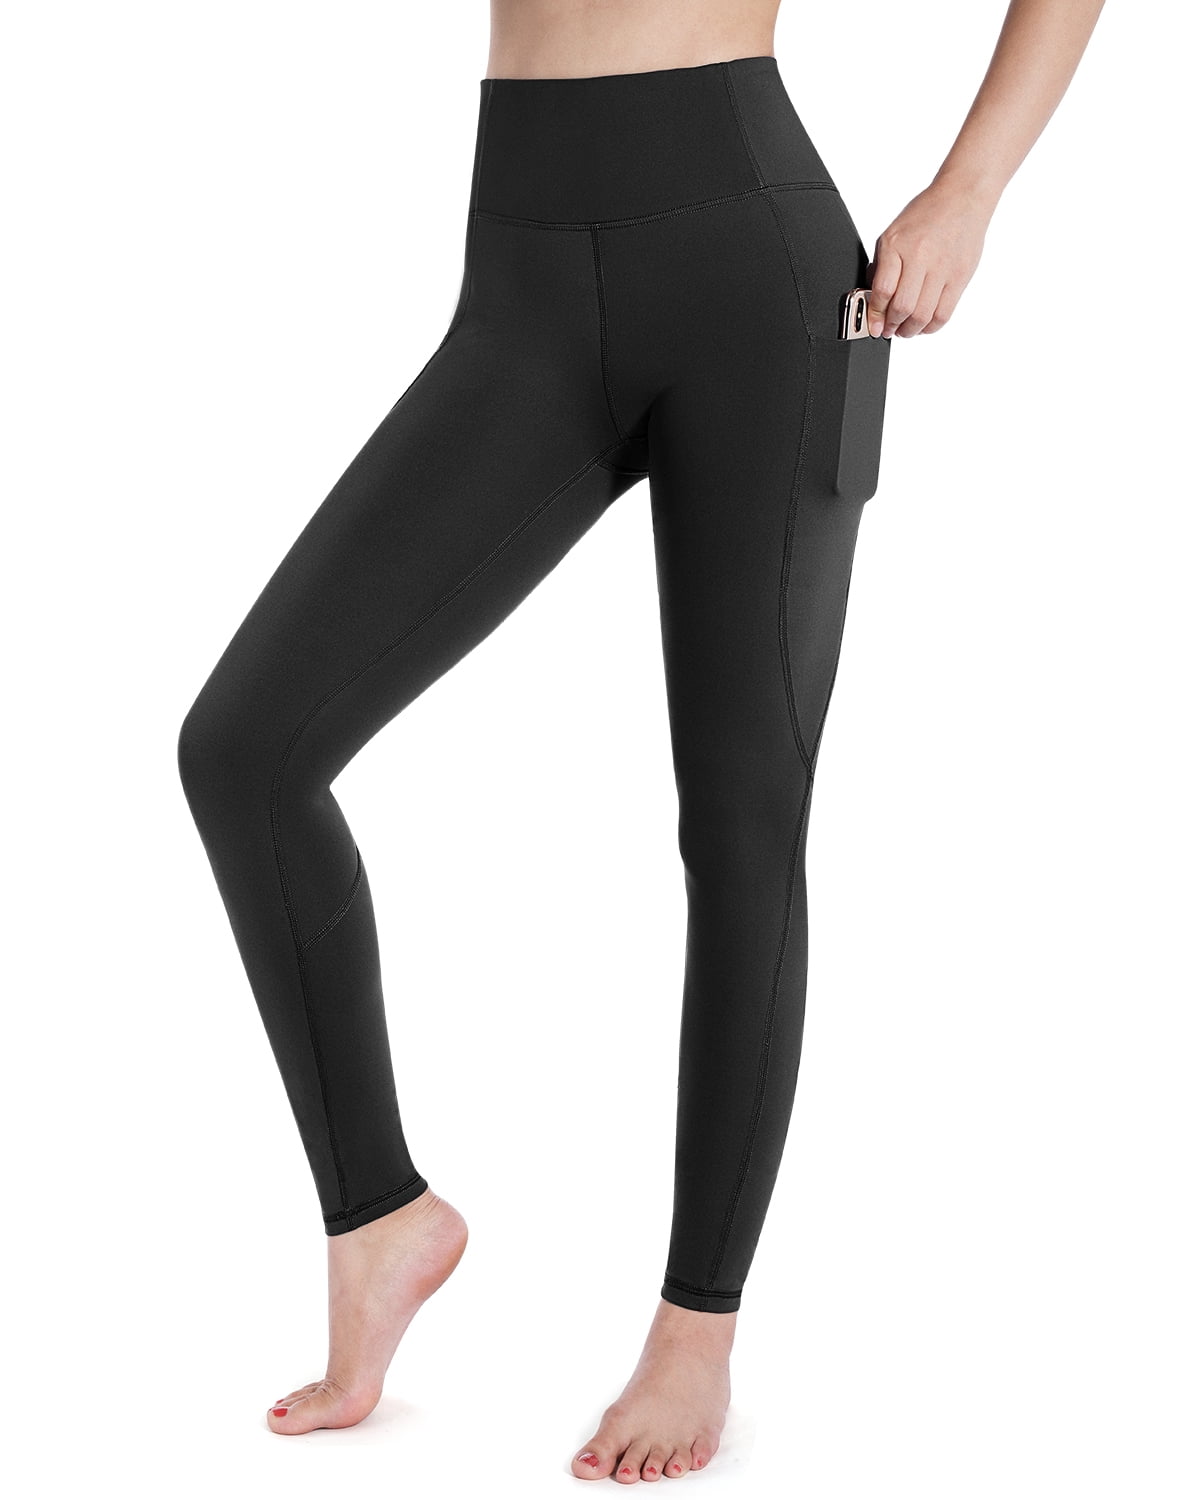 Buy LEINIDINA Yoga Pants for Women - High Waist Tummy Control Stretch Women  Leggings with Side Pockets for Workout, Training (Black, Medium) at